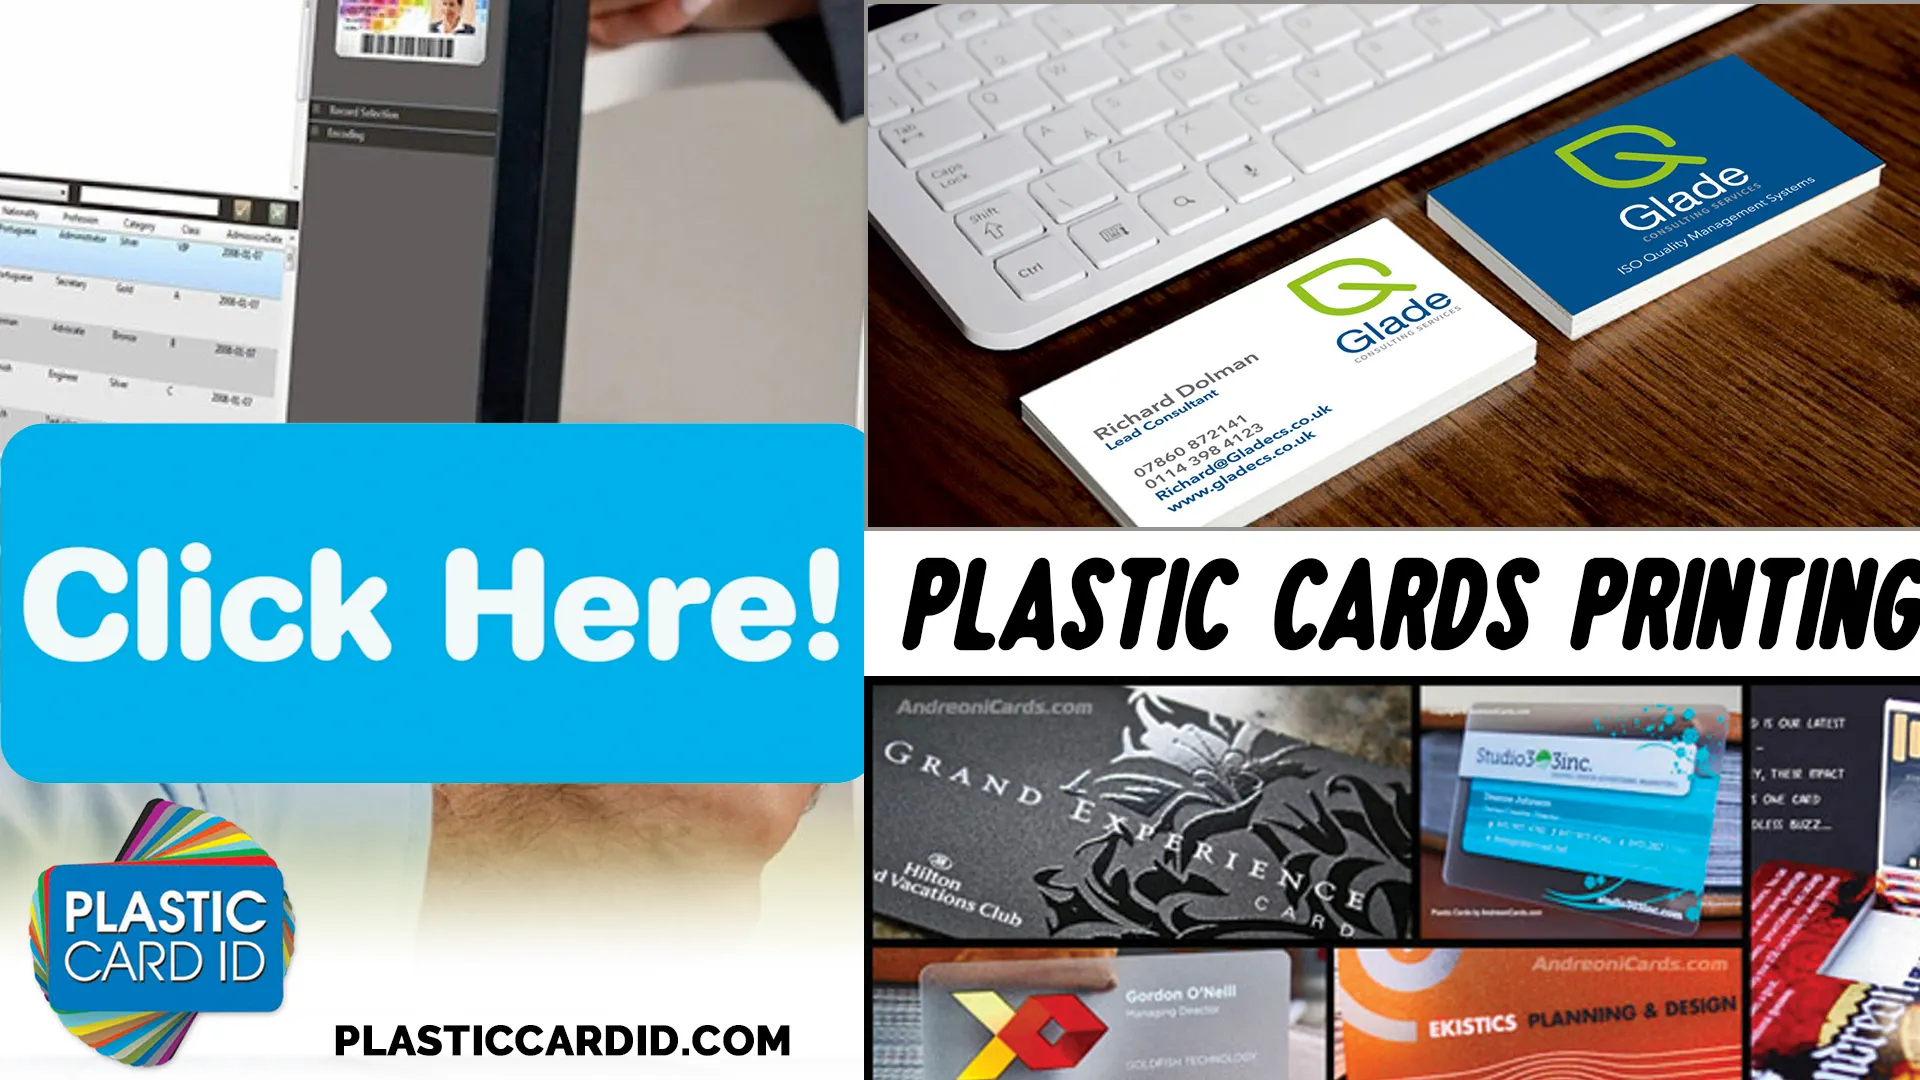 Welcome to the Sustainable Future of Plastic Cards